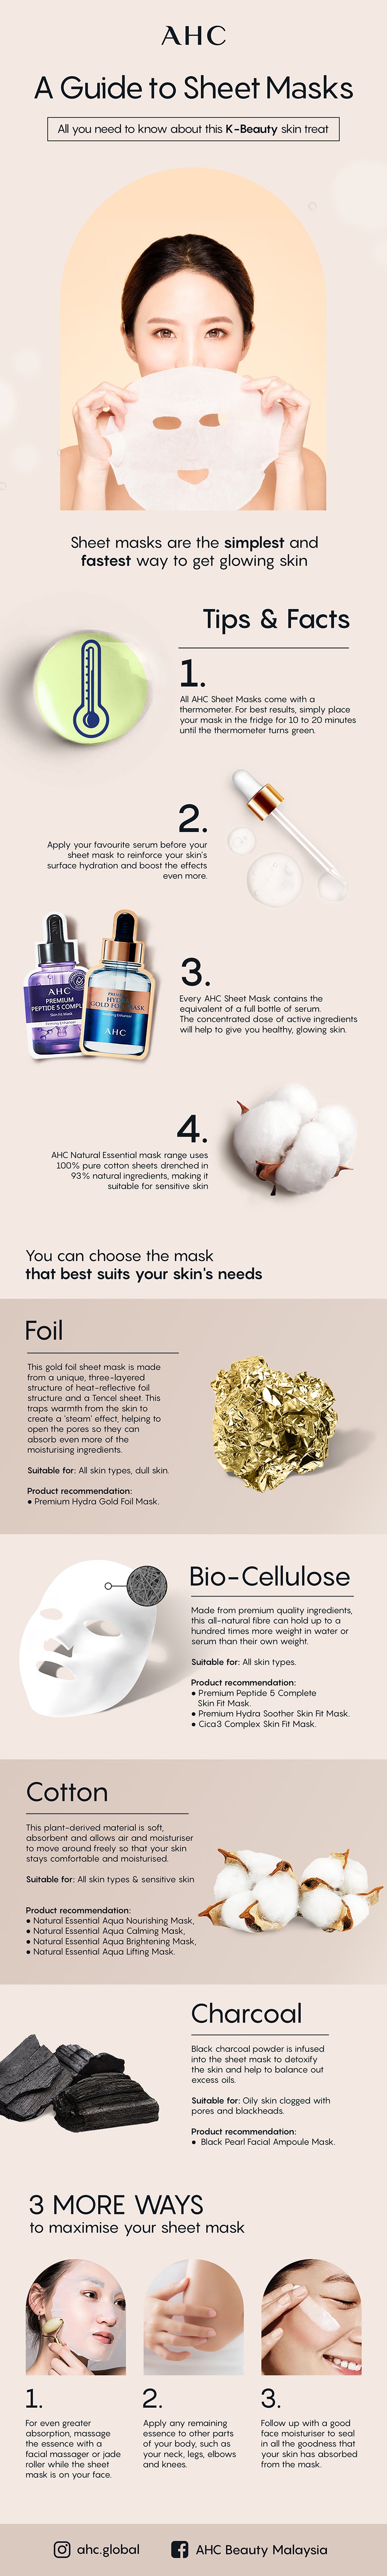 An AHC infographic about a guide to use sheet masks